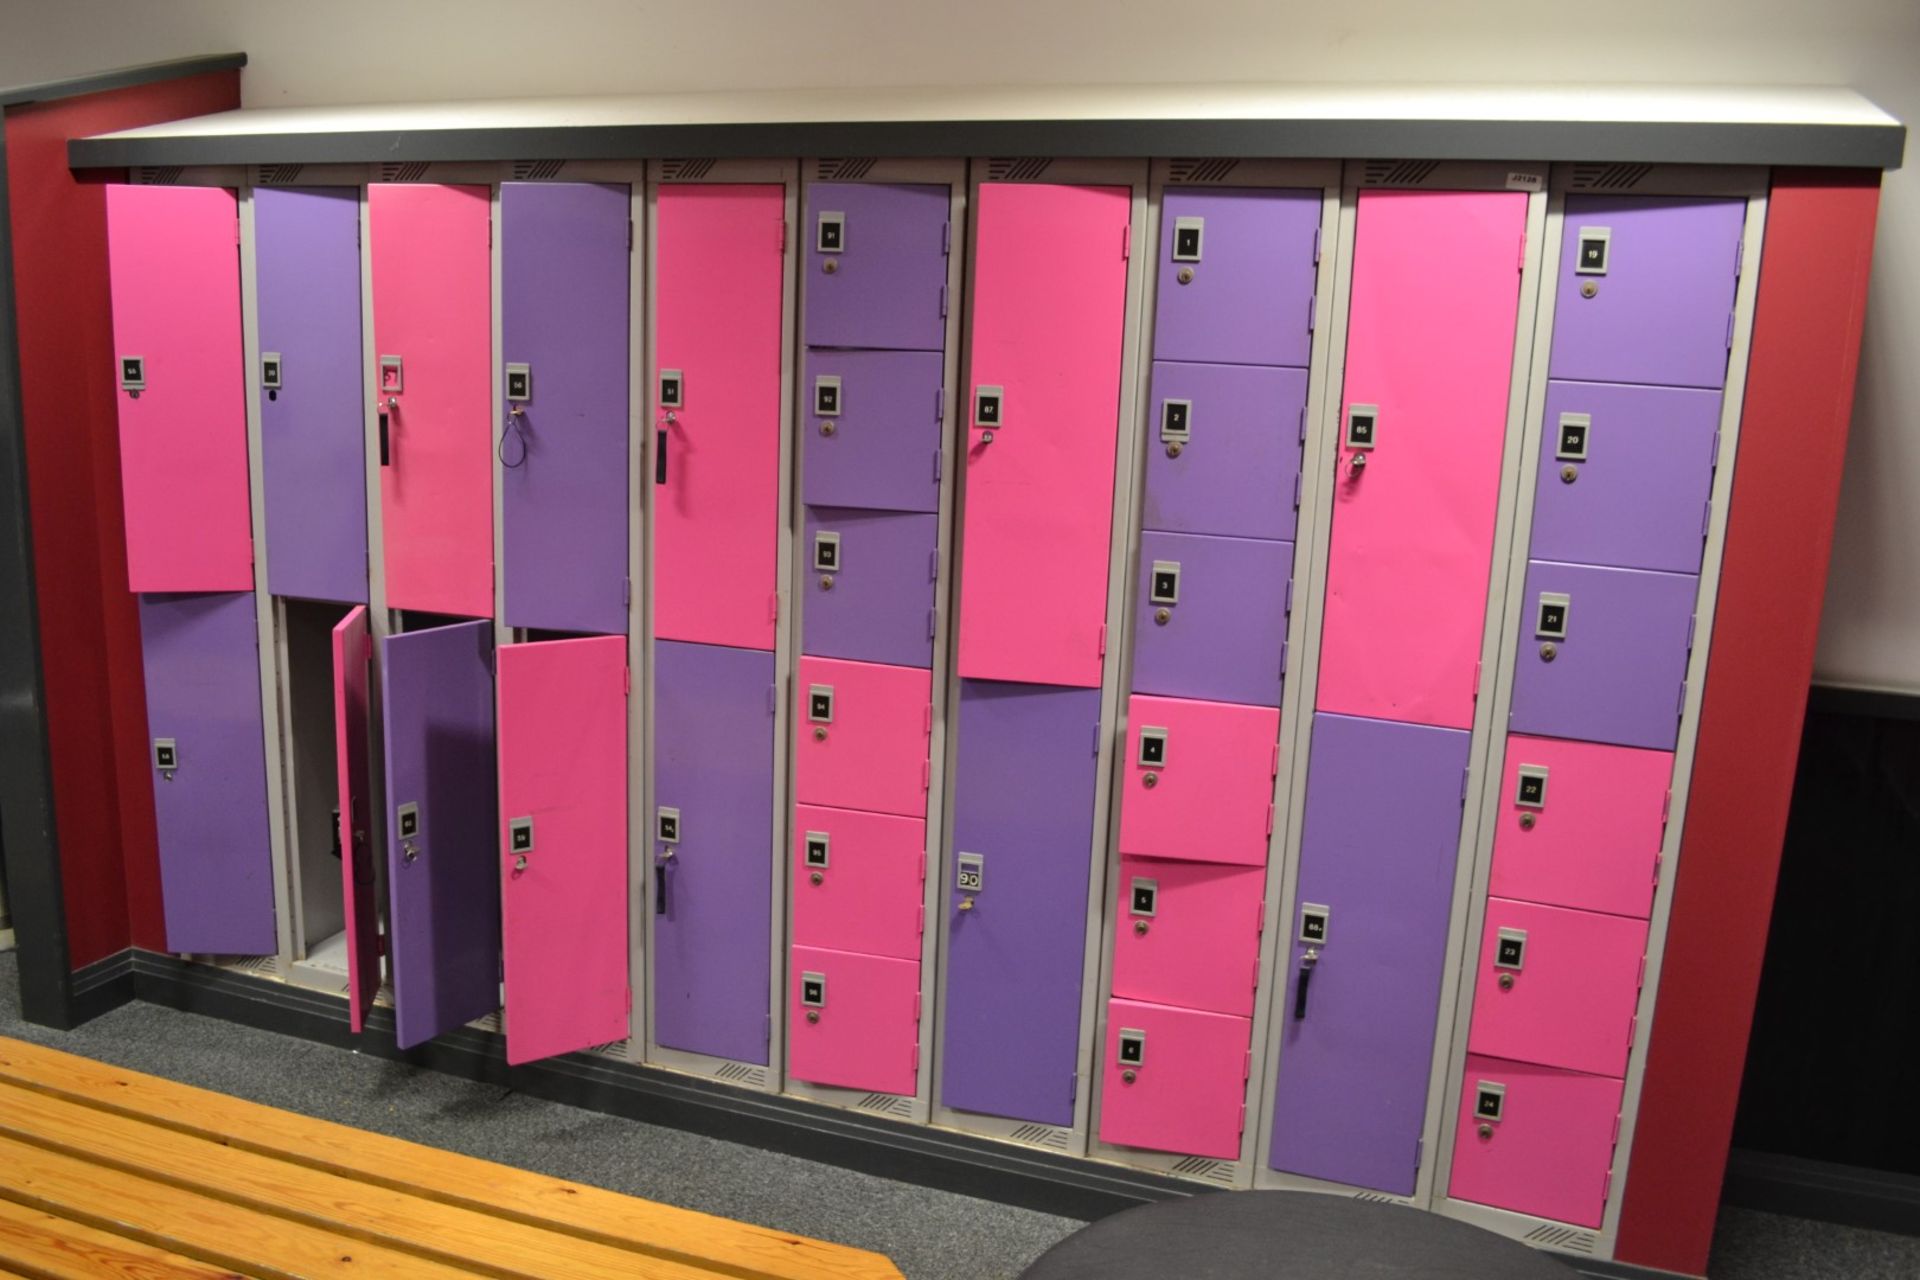 32 x Steel Changing Room Lockers in Purple and Pink - Some With Keys and Some Without -